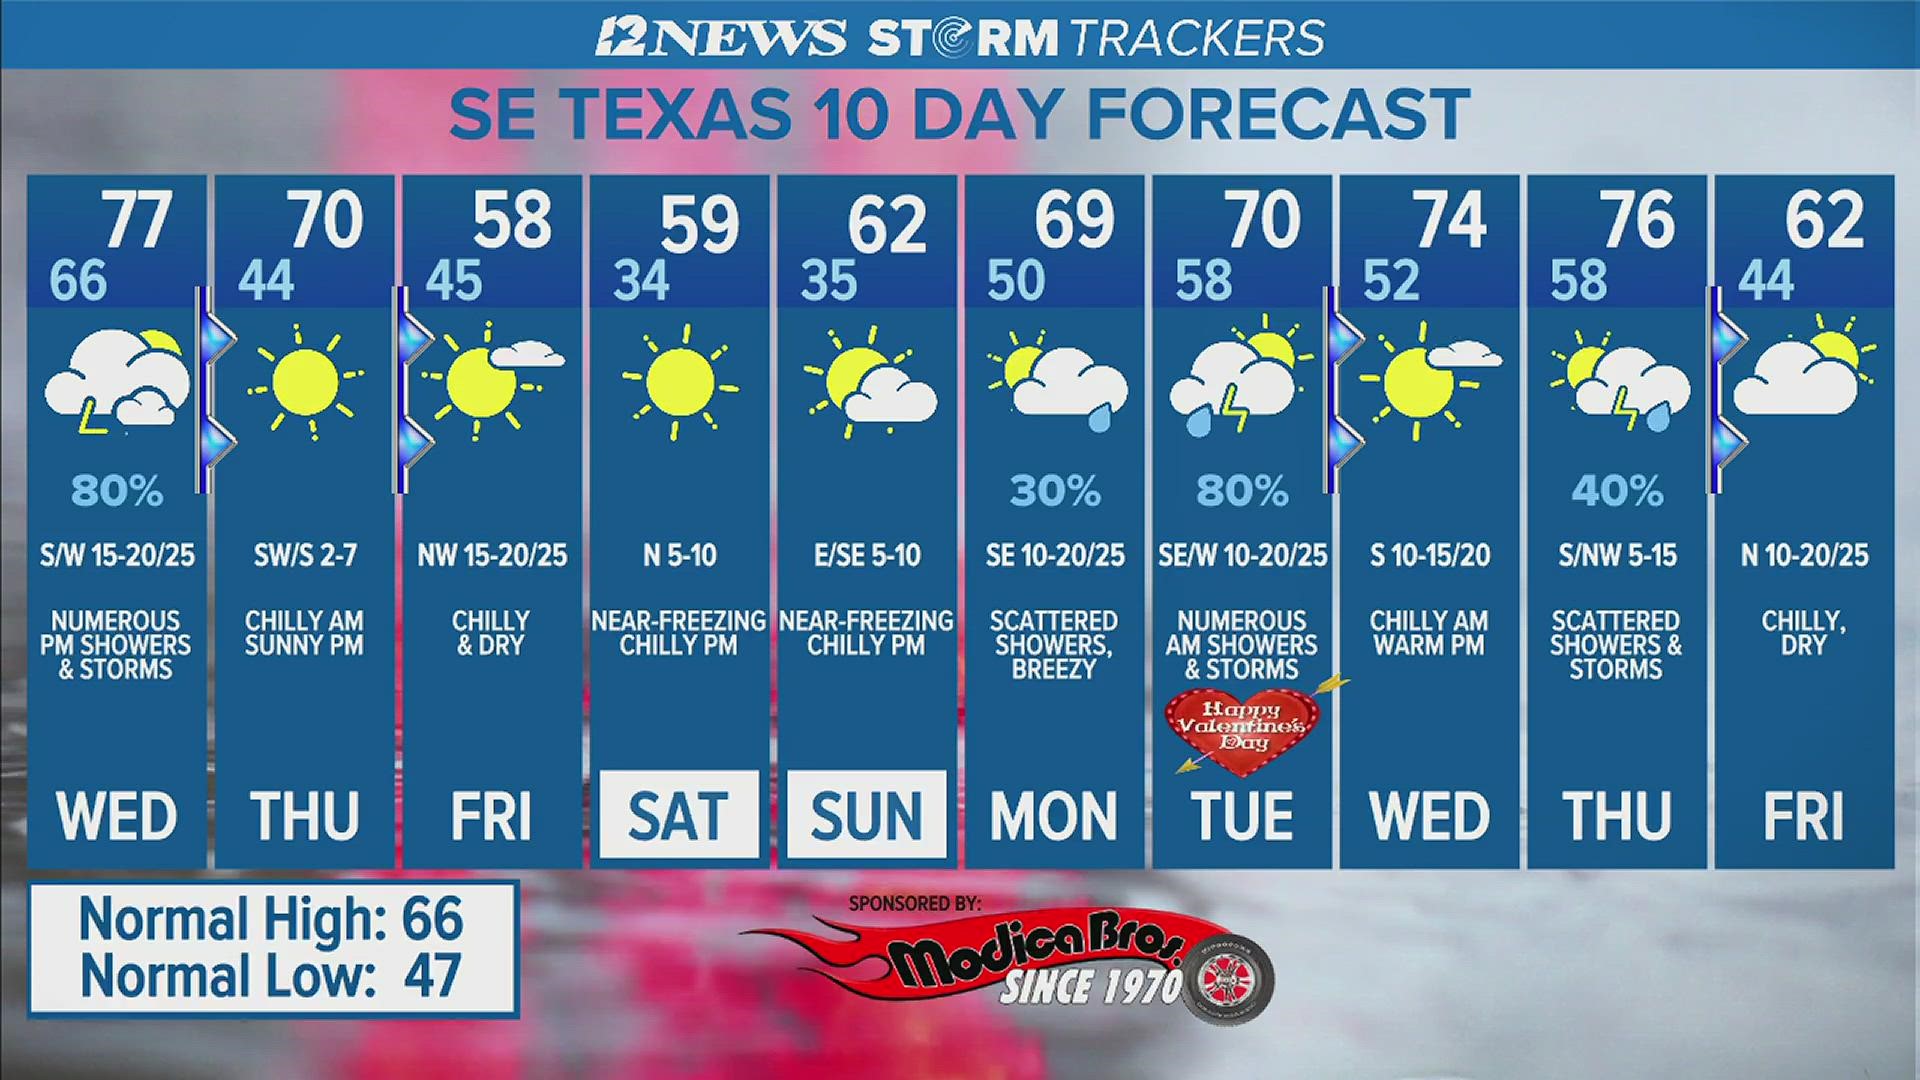 Spring-like weather conditions will come to an end Wednesday afternoon thanks to storms and a cold front followed by a stronger cold front Friday